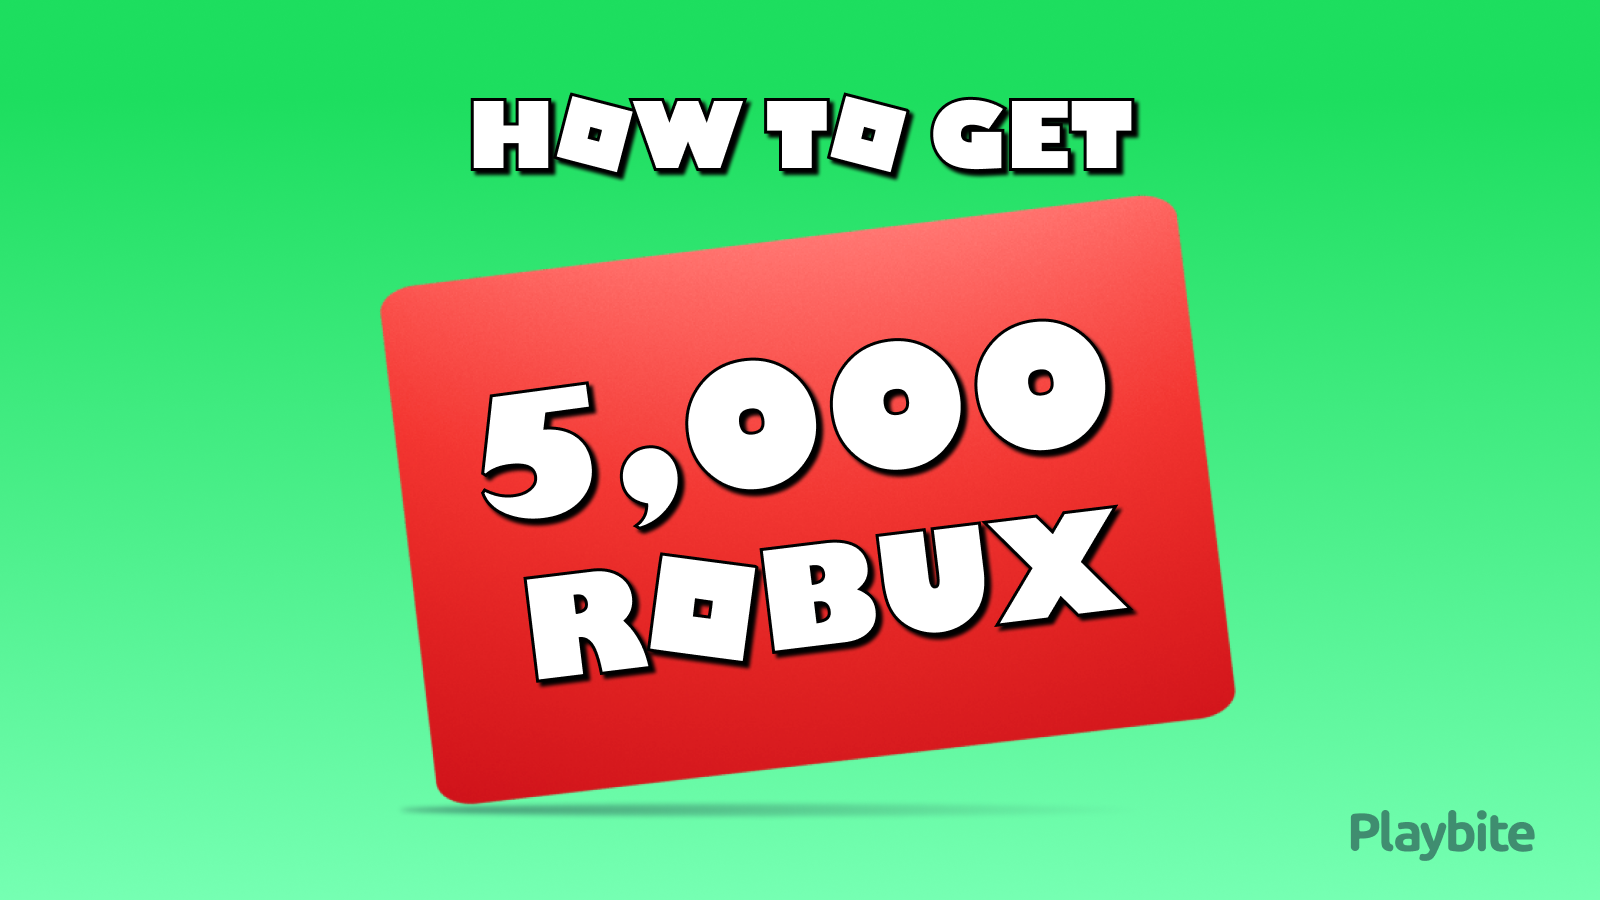 How To Get 5000 Robux For Free - Playbite